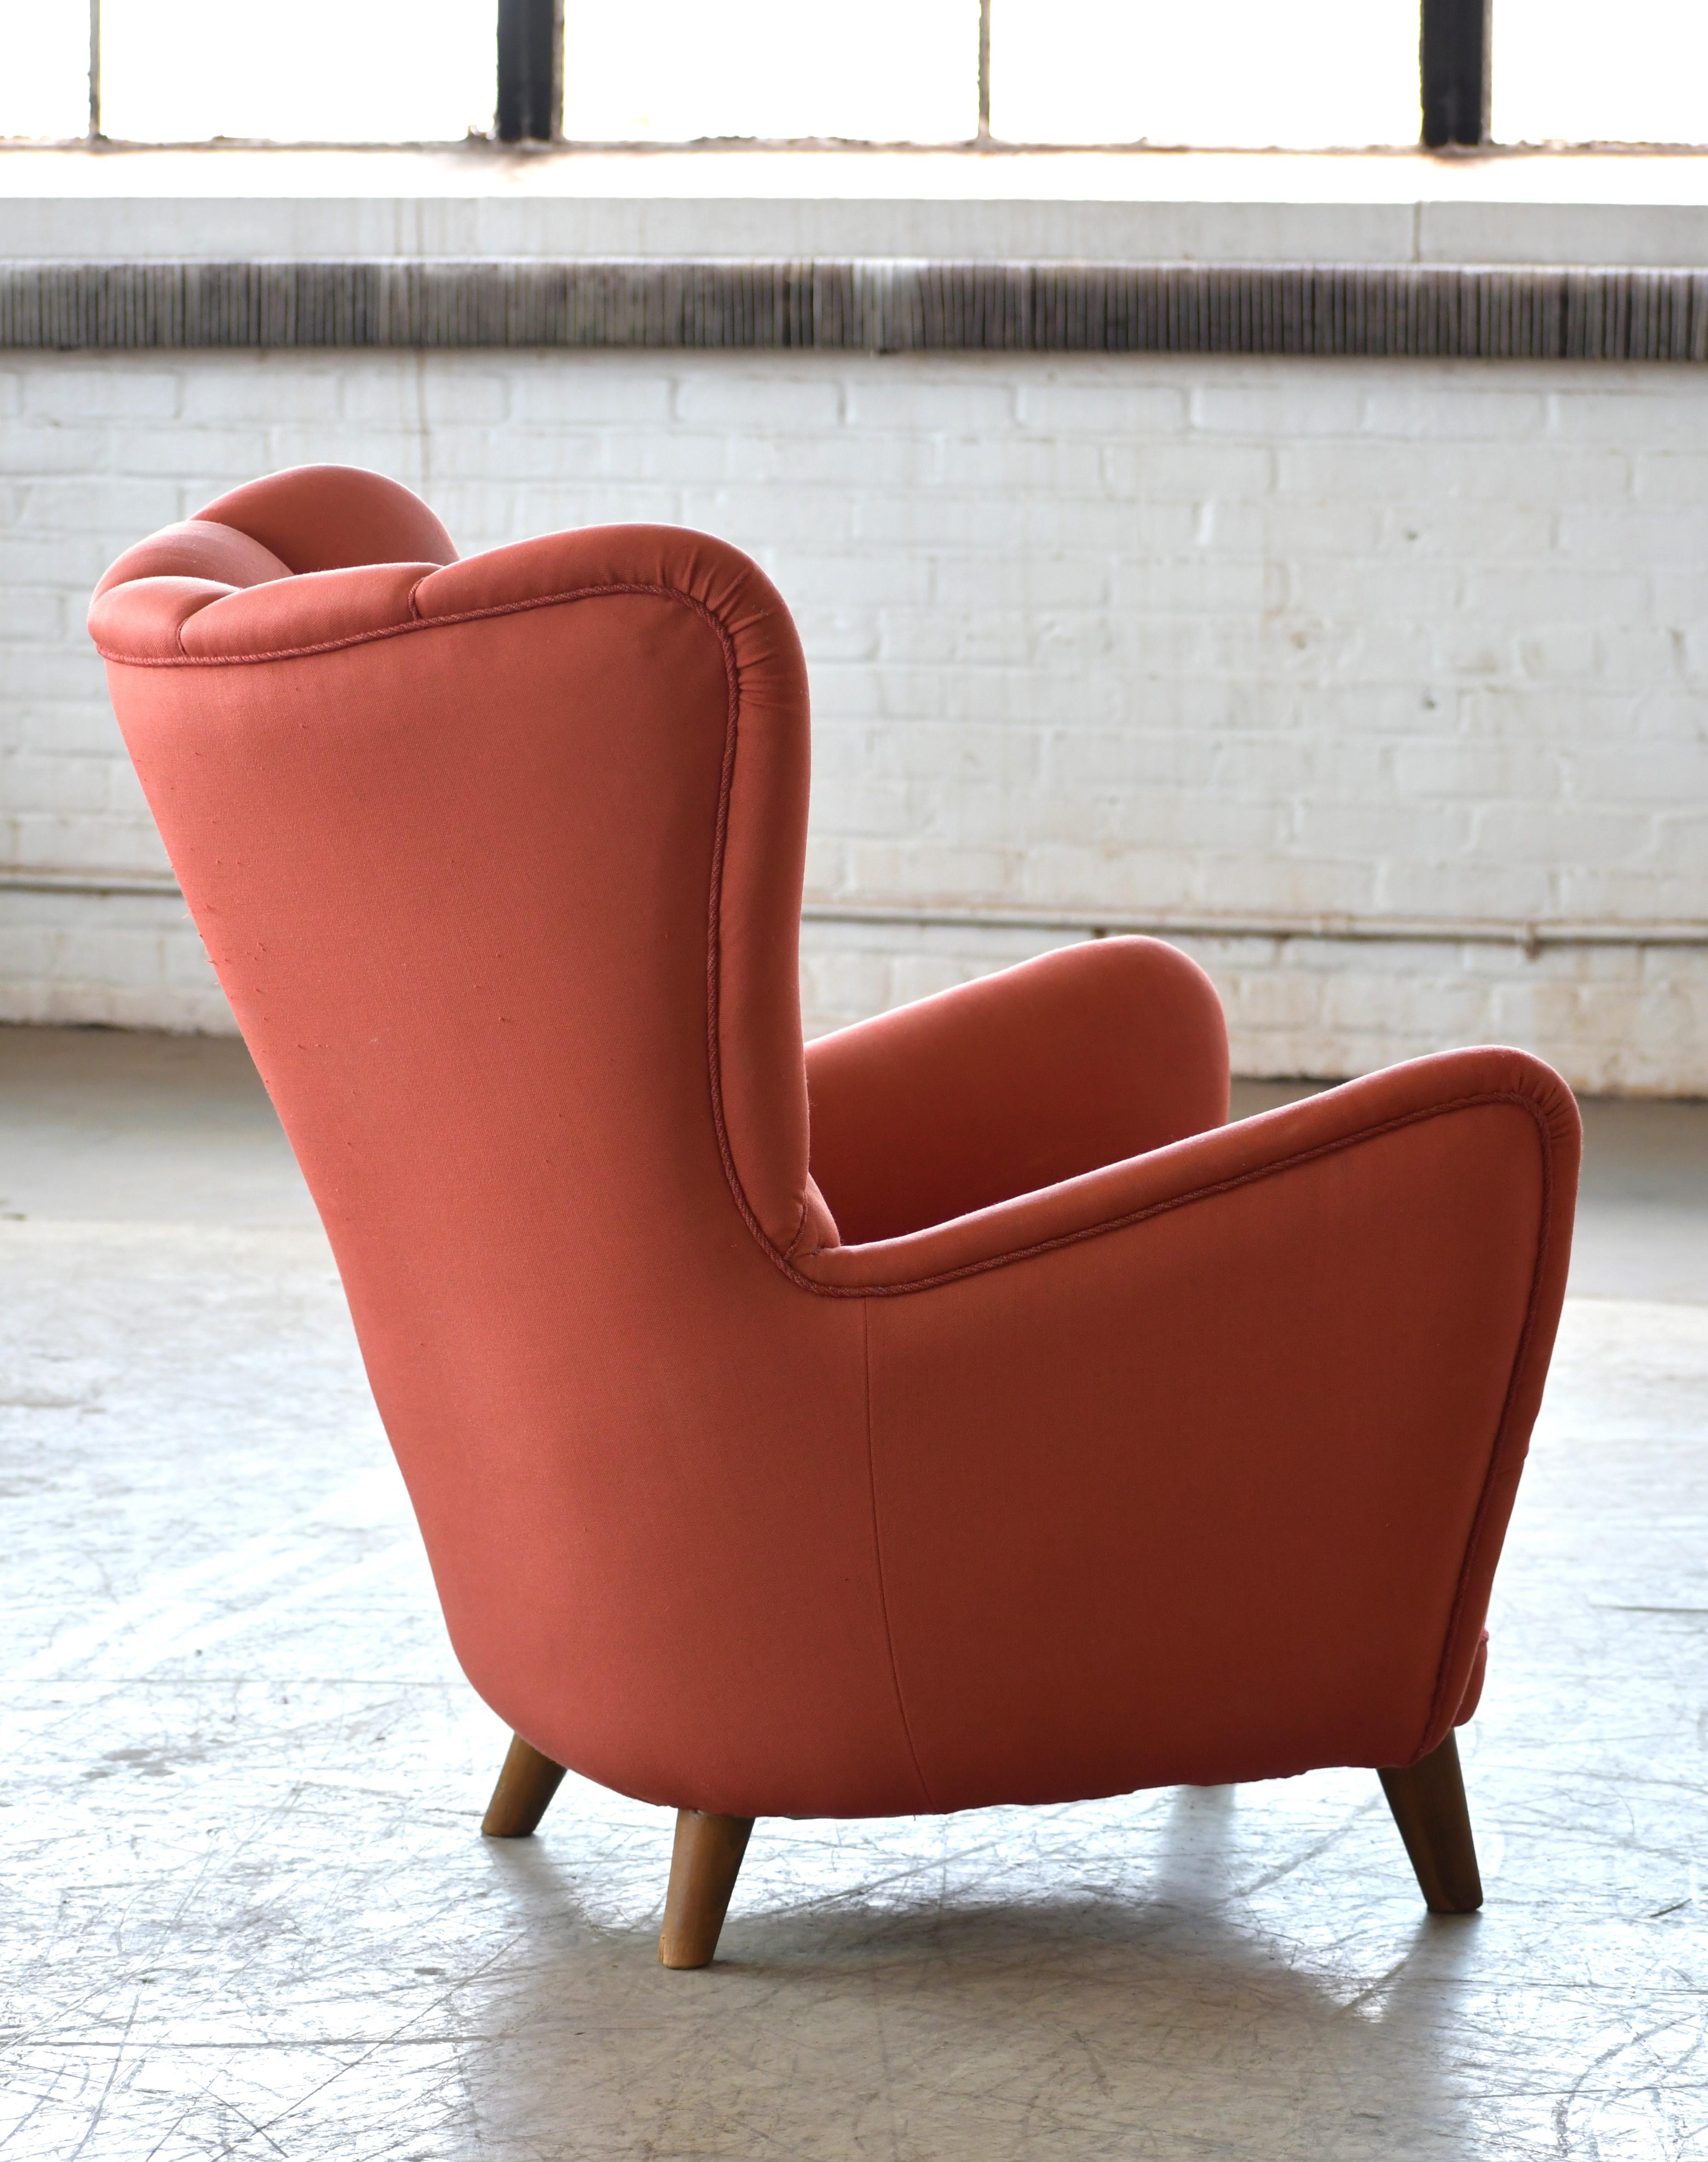 Exquisite Danish Lassen Style Mid-Century Lounge Chair in Red Wool, 1940's For Sale 2